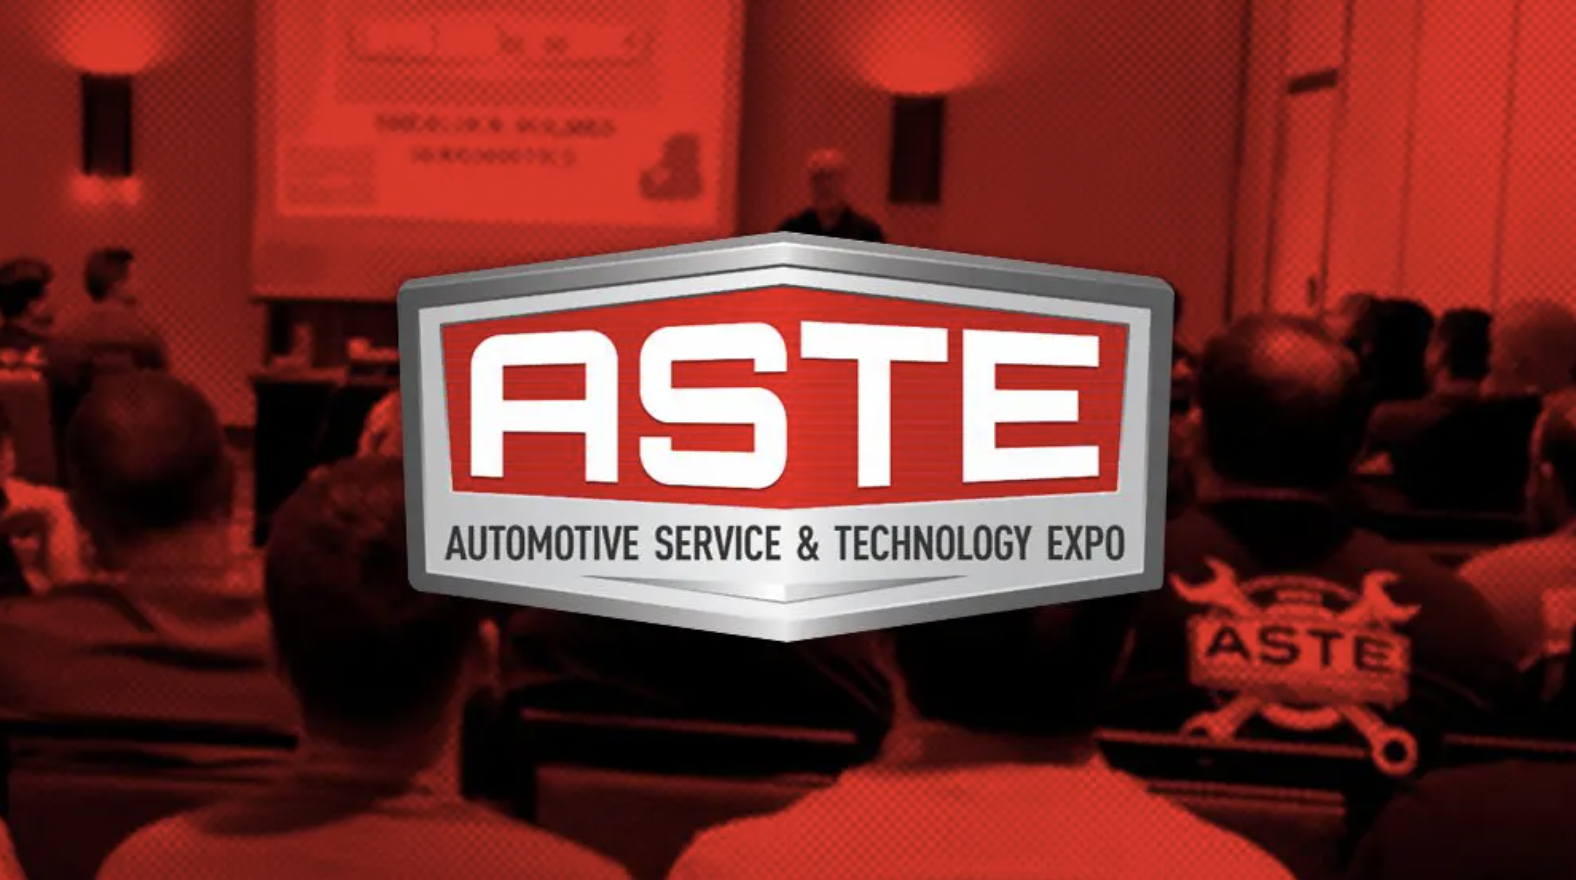 Autoshop Solutions and Mechanic Advisor to Present at ASTE